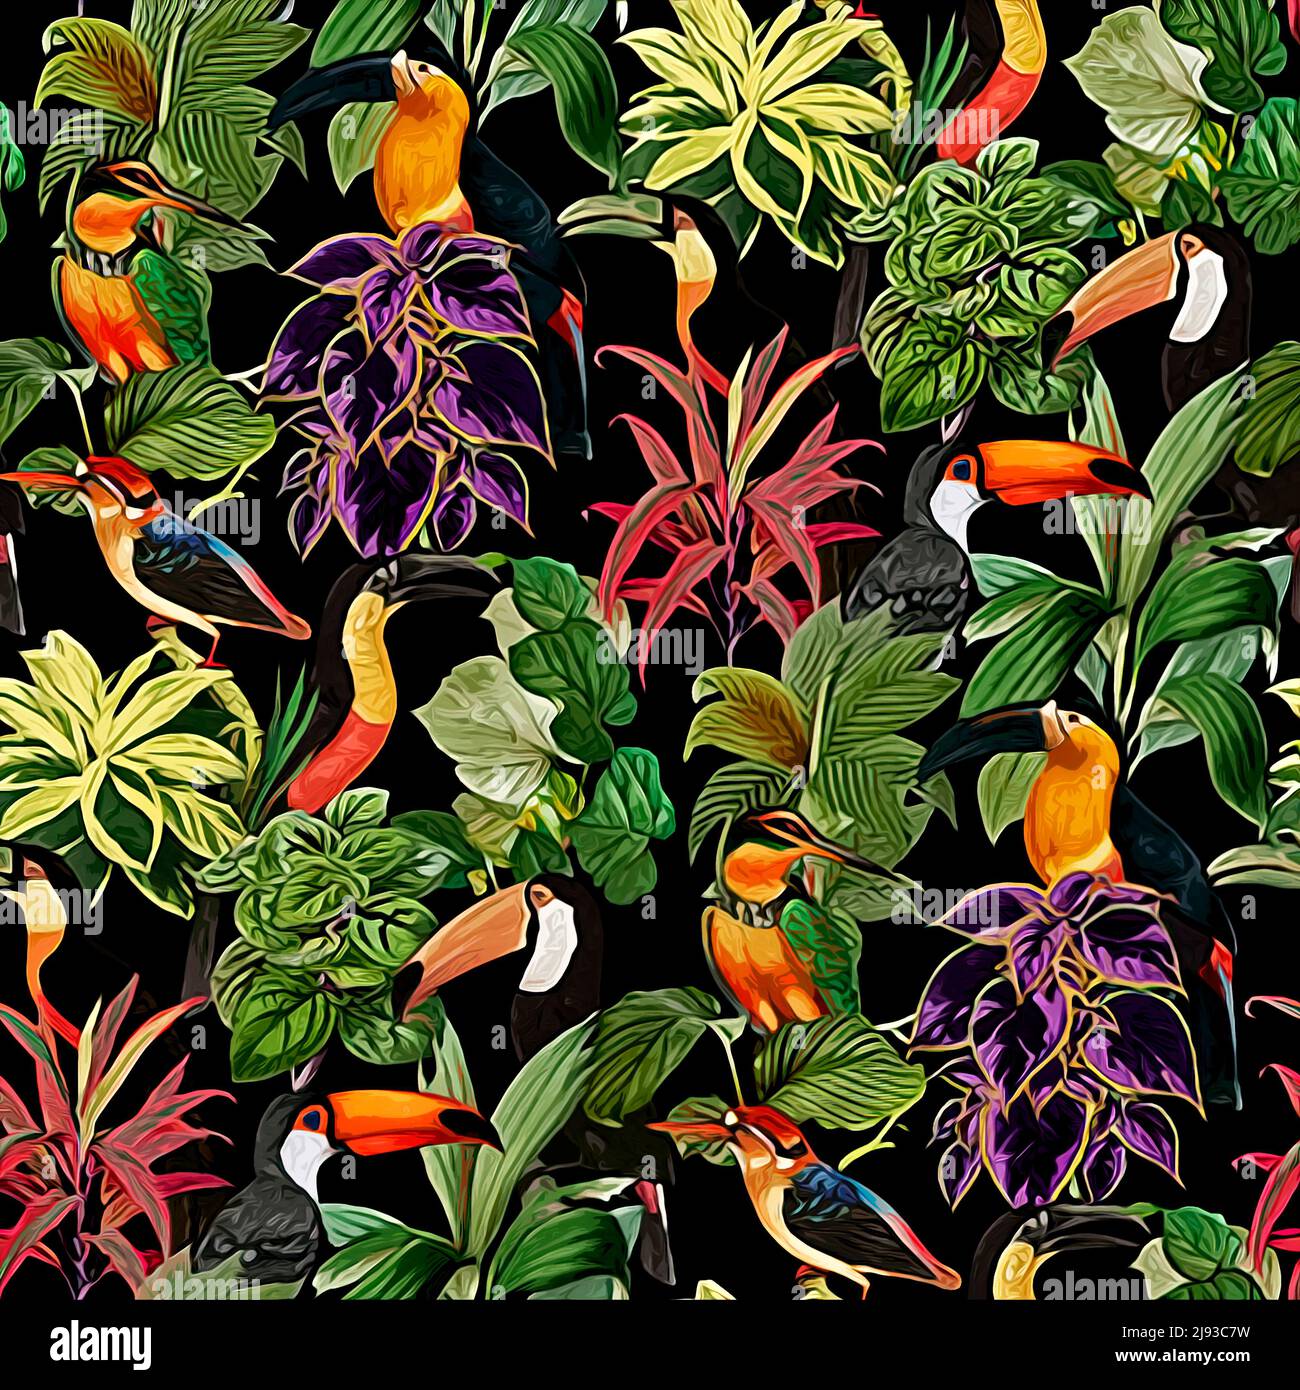 Textile and wallpaper patterns. A printable digital illustration work. Floral Print designs. Stock Photo